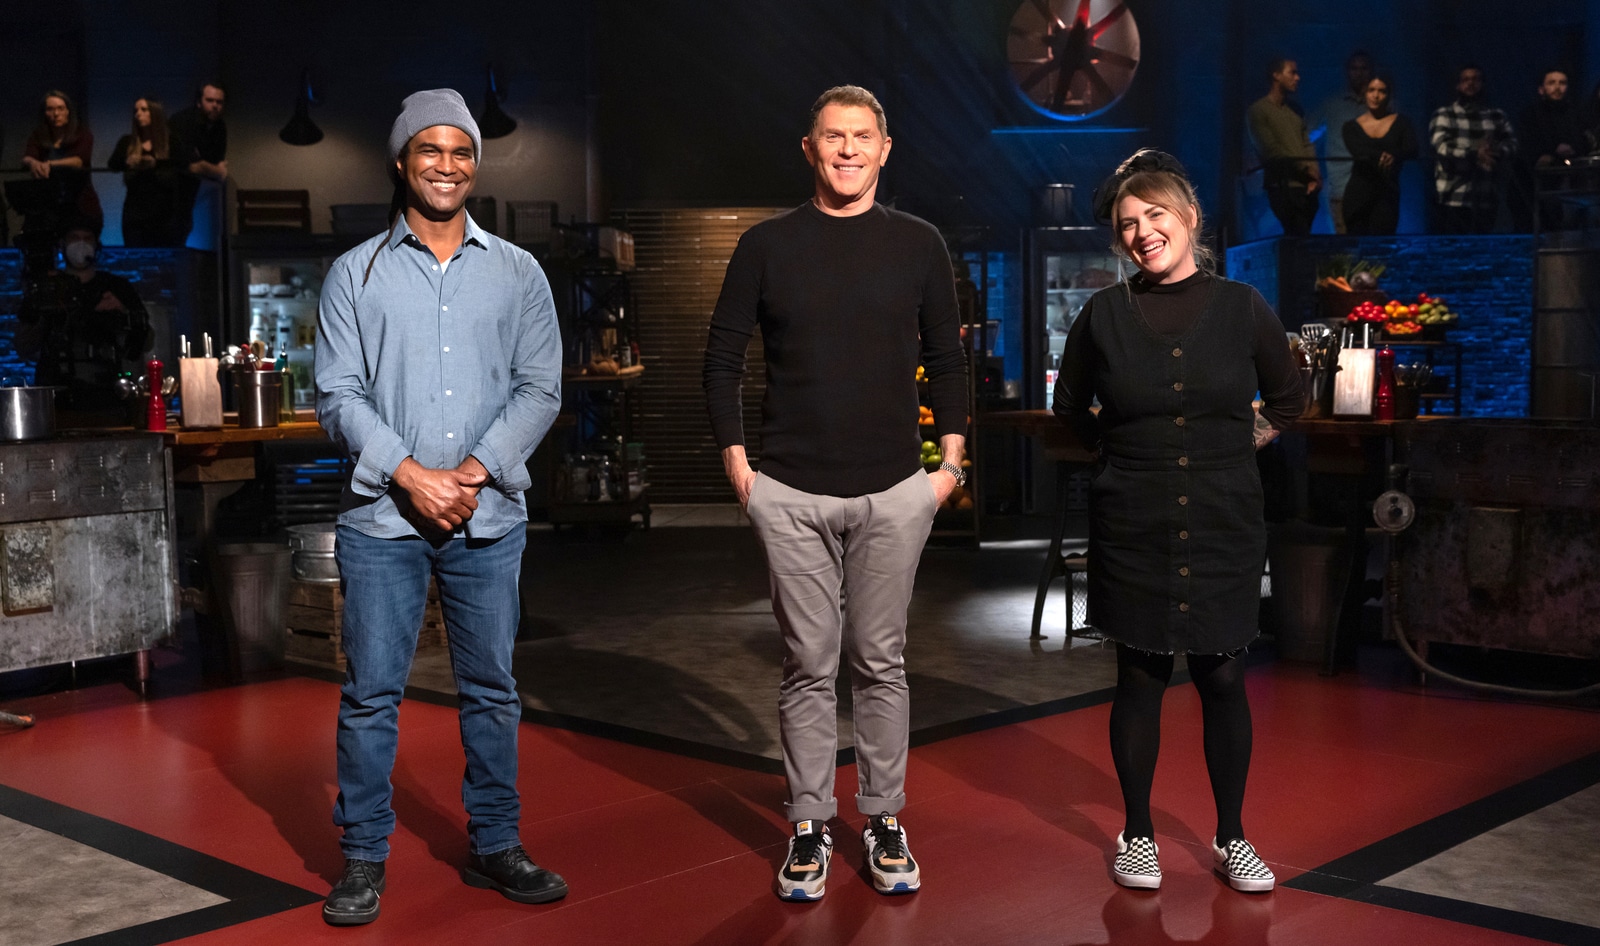 These Vegan Chefs Used Beets to Beat Bobby Flay At His Own Game